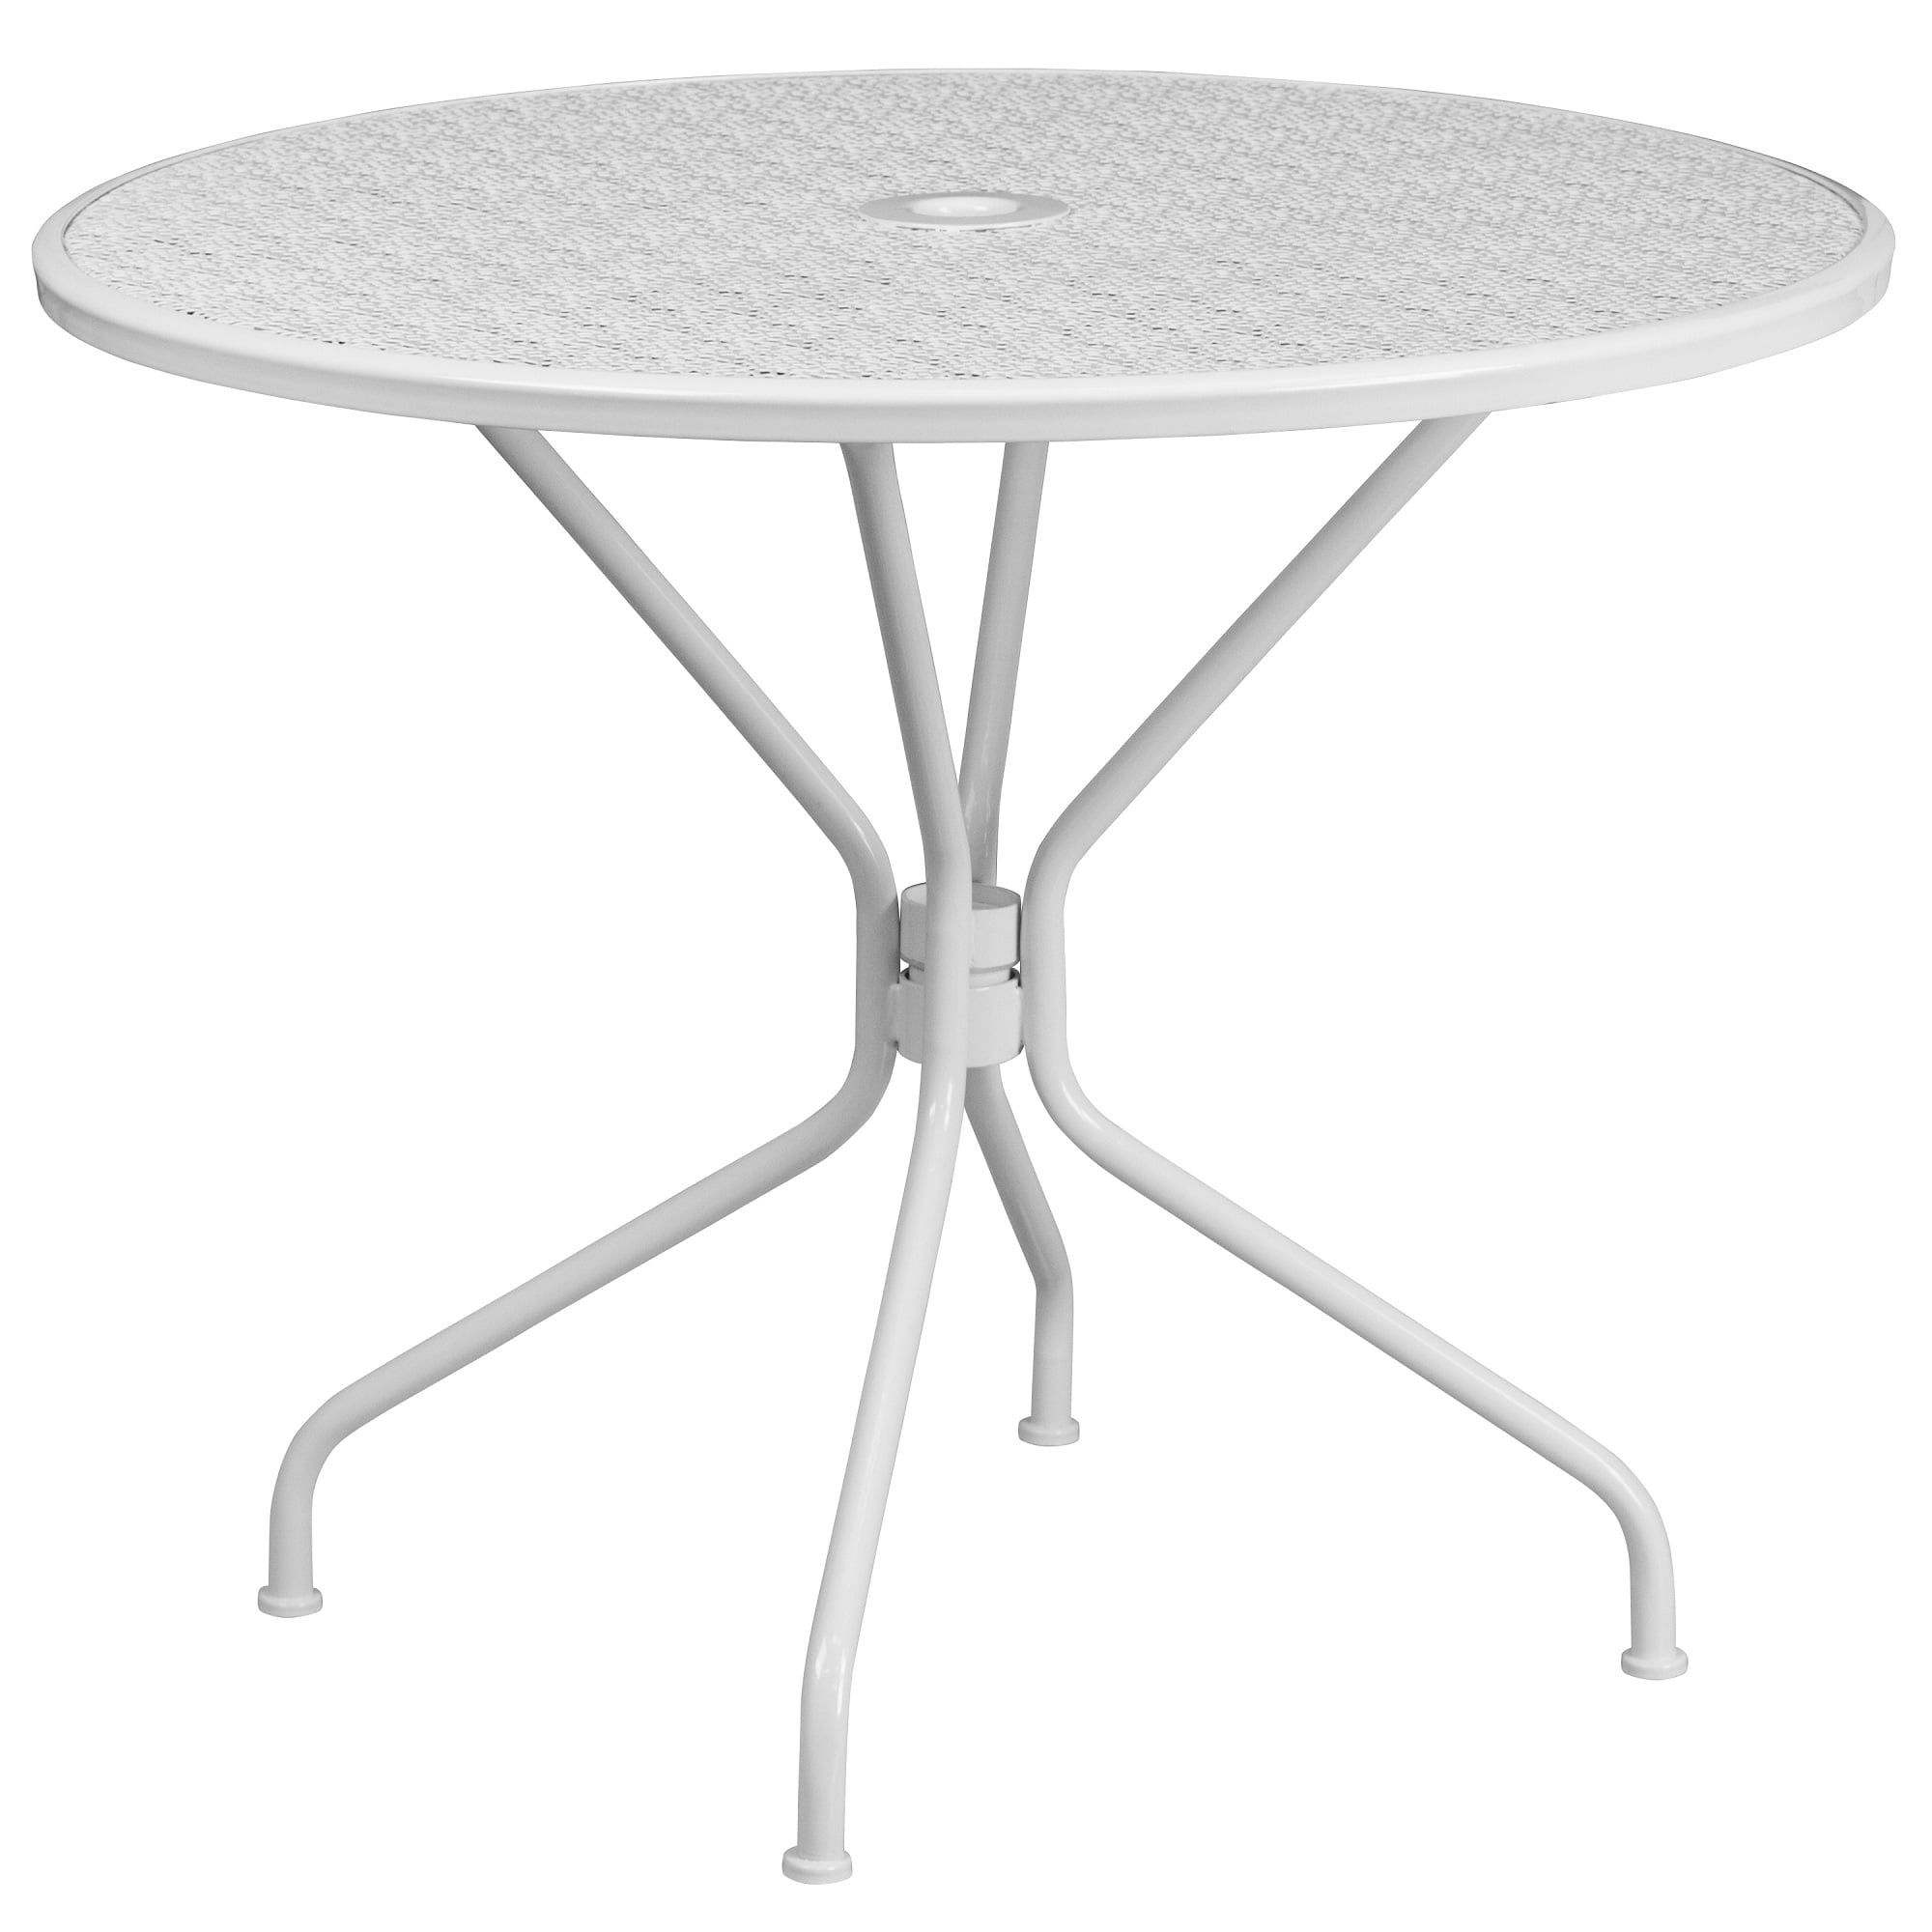 35 25 White Contemporary Round Outdoor, Round Patio Table With Umbrella Hole And Chairs